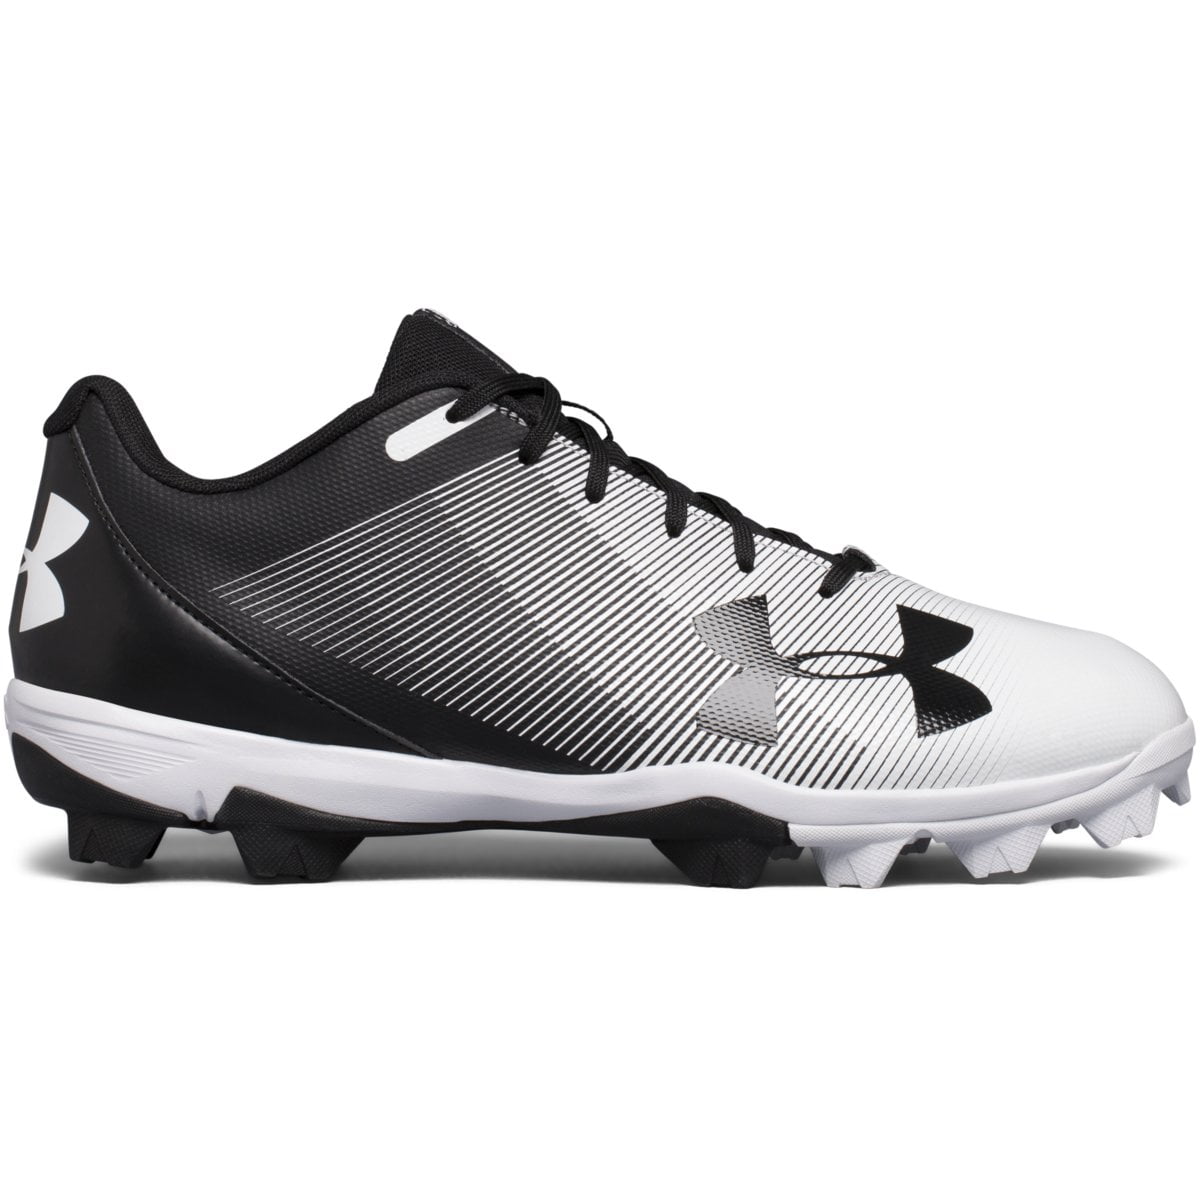 NWOB Under Armour Men's Leadoff Low RM Molded Baseball Cleats White/Black 10 11